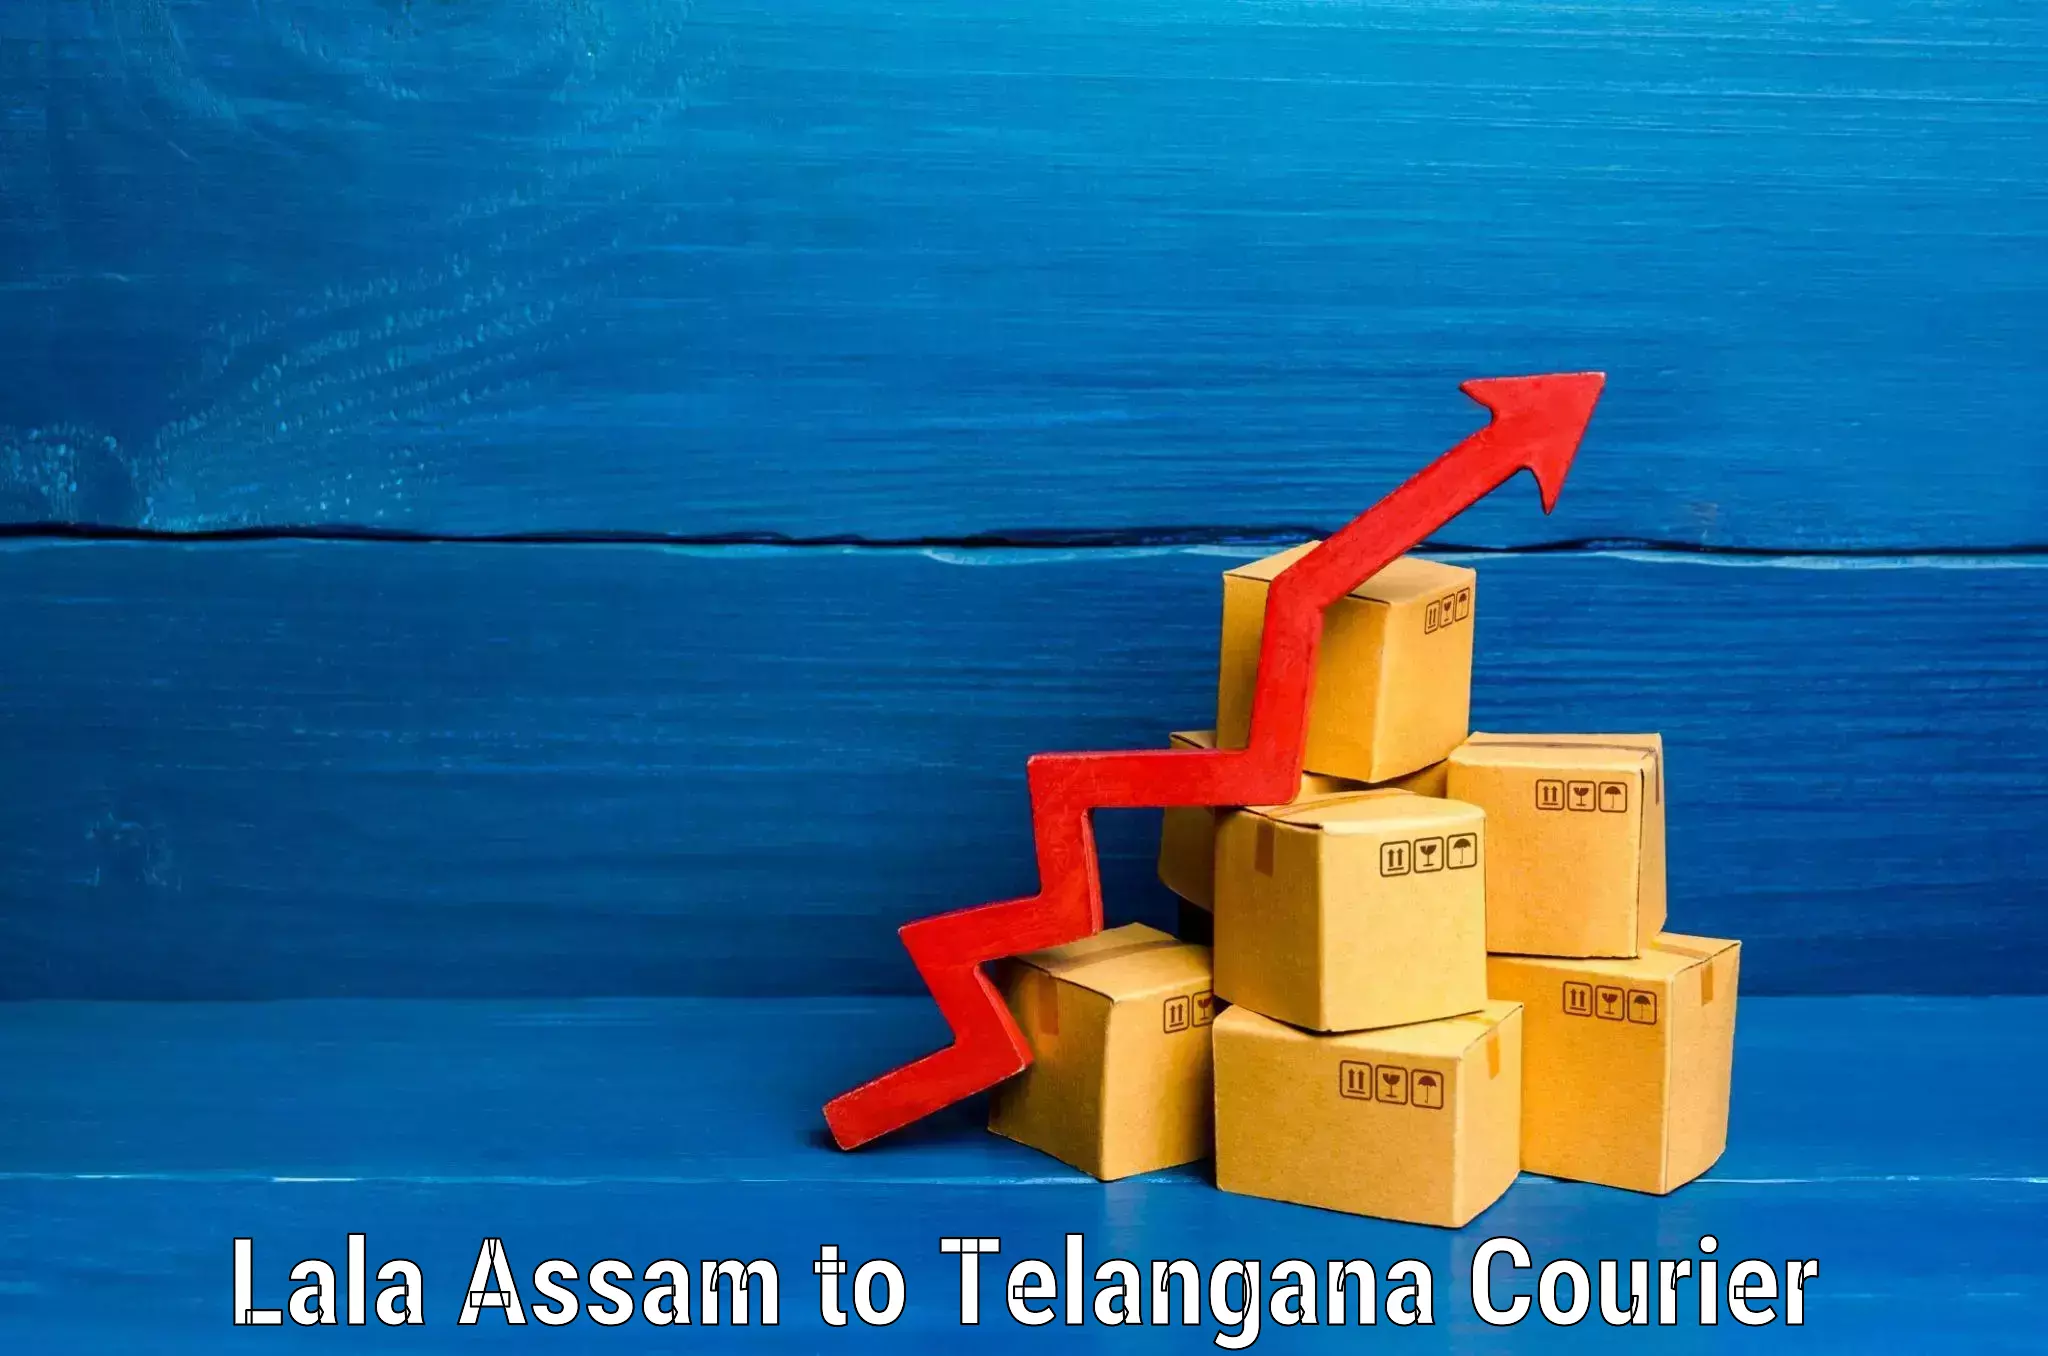 Luggage shipping guide in Lala Assam to Manneguda